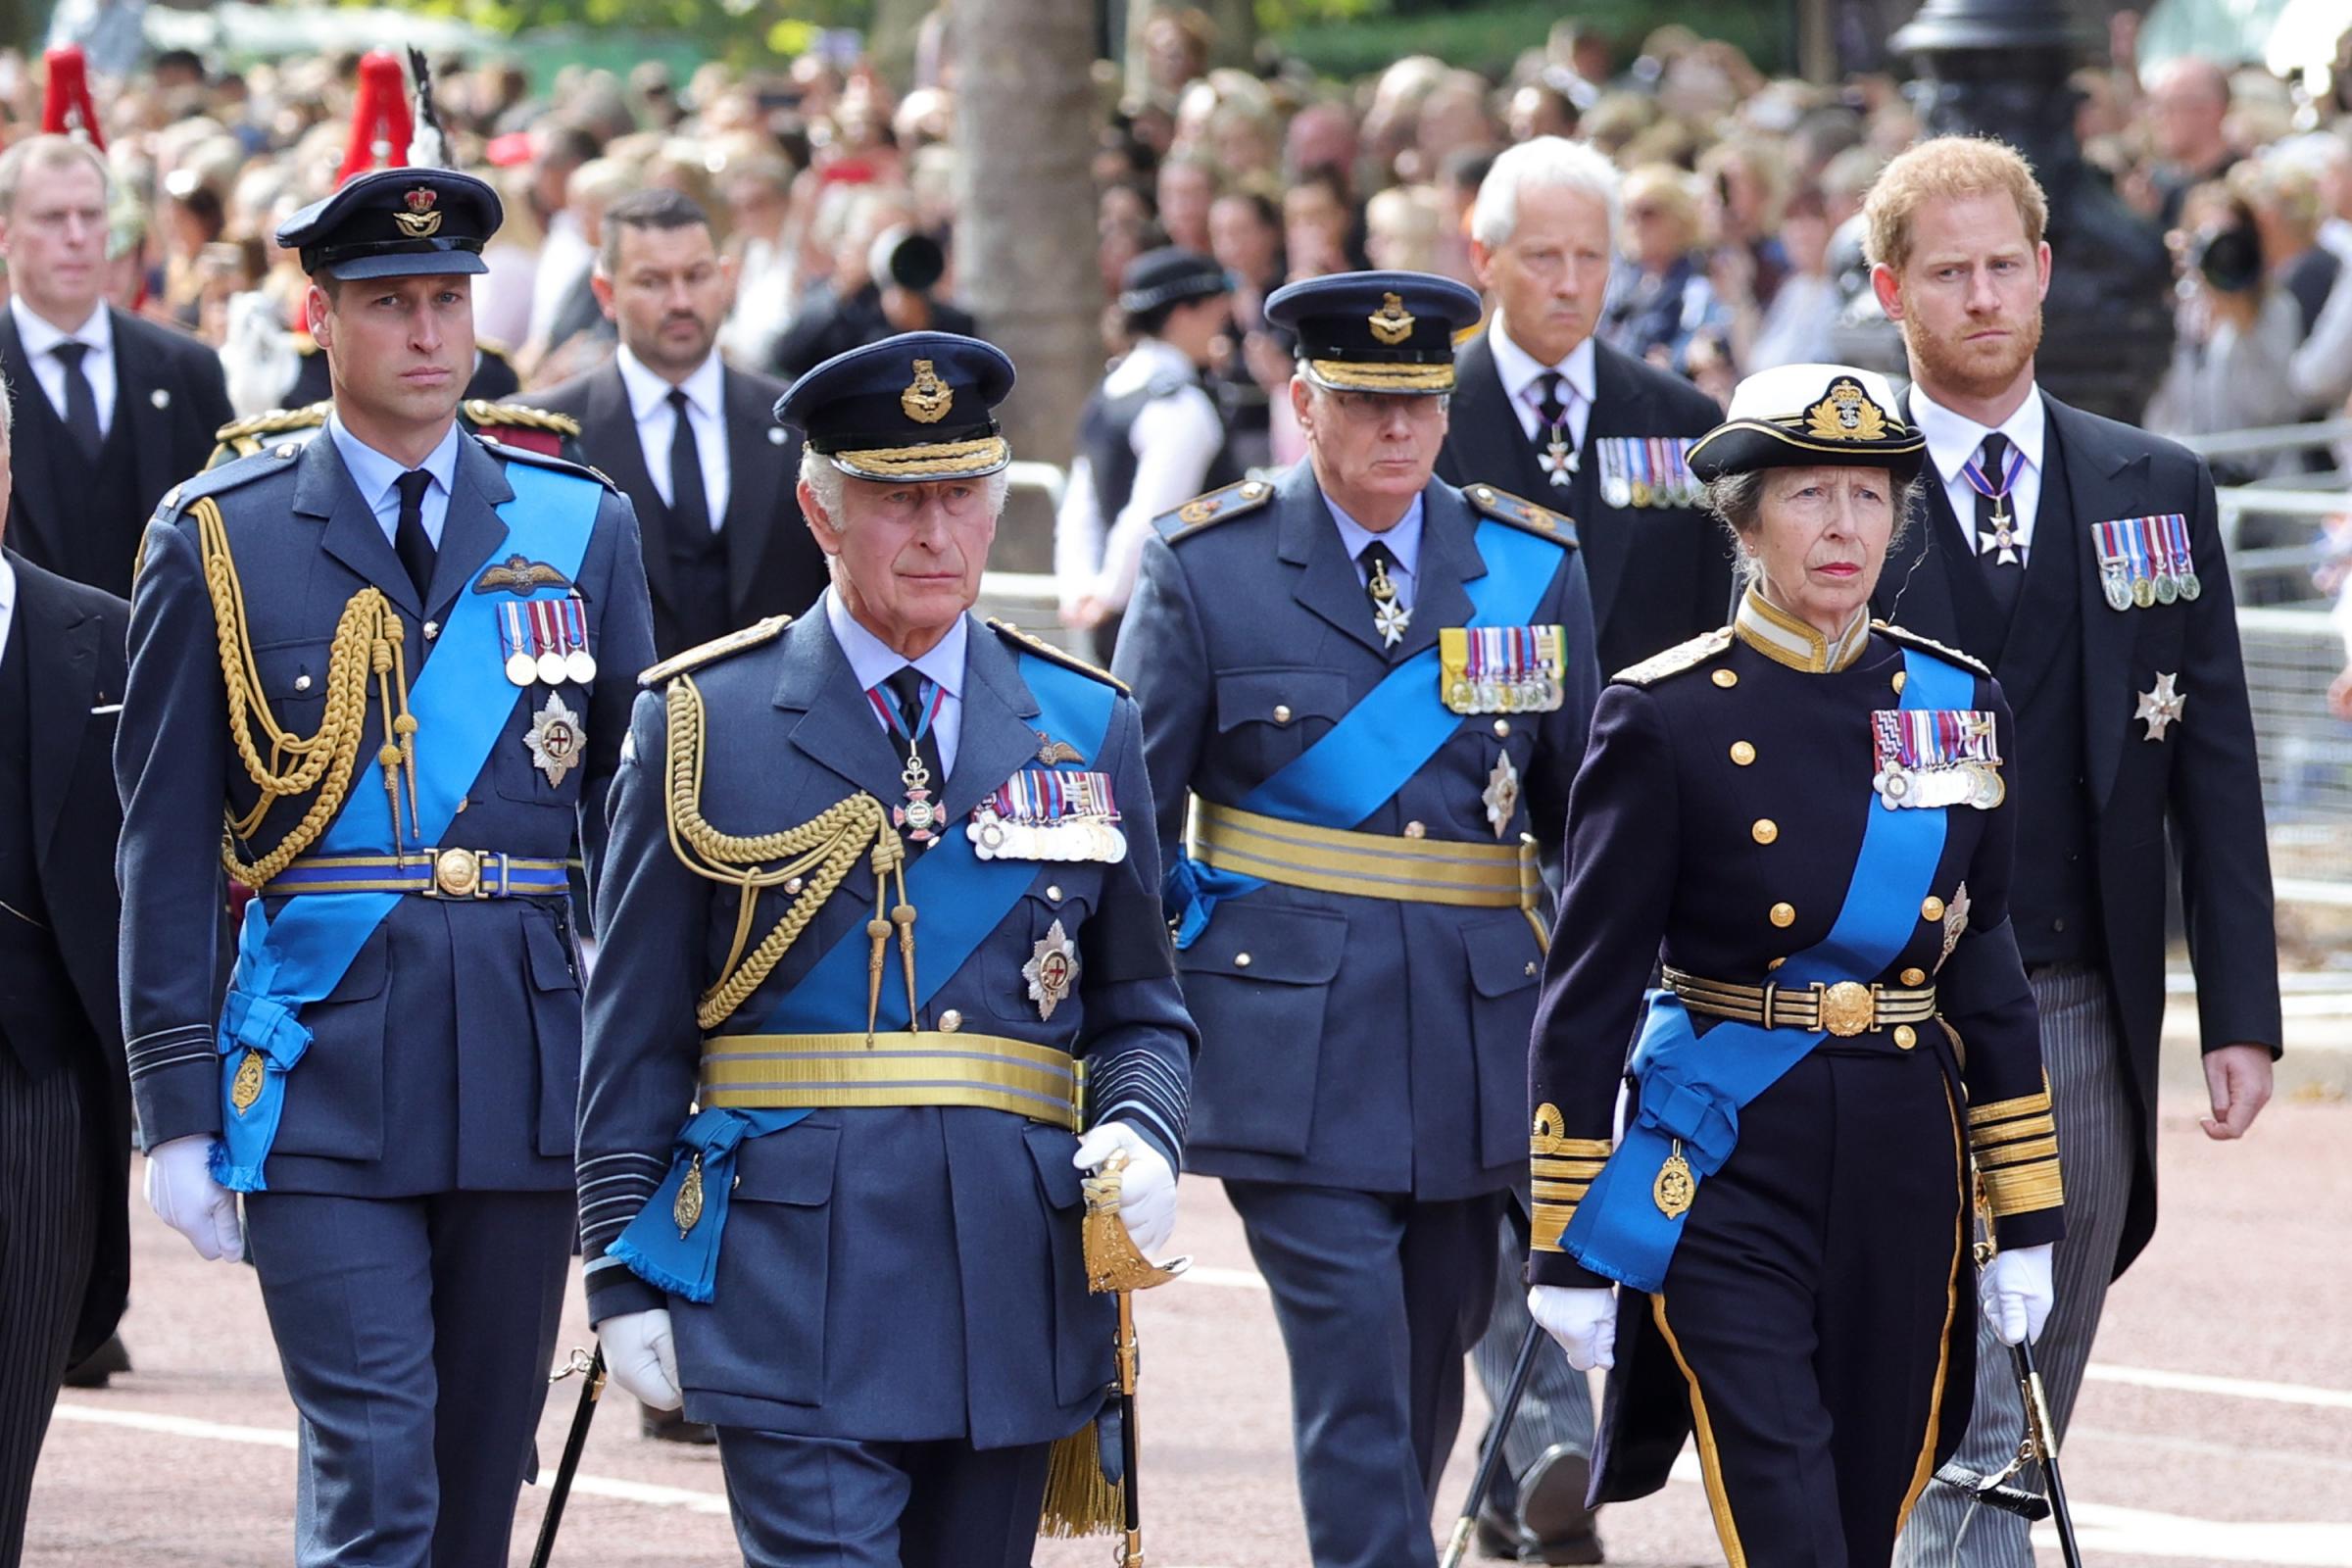 LONDON, ENGLAND - SEPTEMBER 14: Prince William, Prince of Wales, King Charles III, Prince Richard, Duke of Gloucester, Anne, Princess Royal and Prince Harry, Duke of Sussex walk behind the coffin during the procession for the Lying-in State of Queen